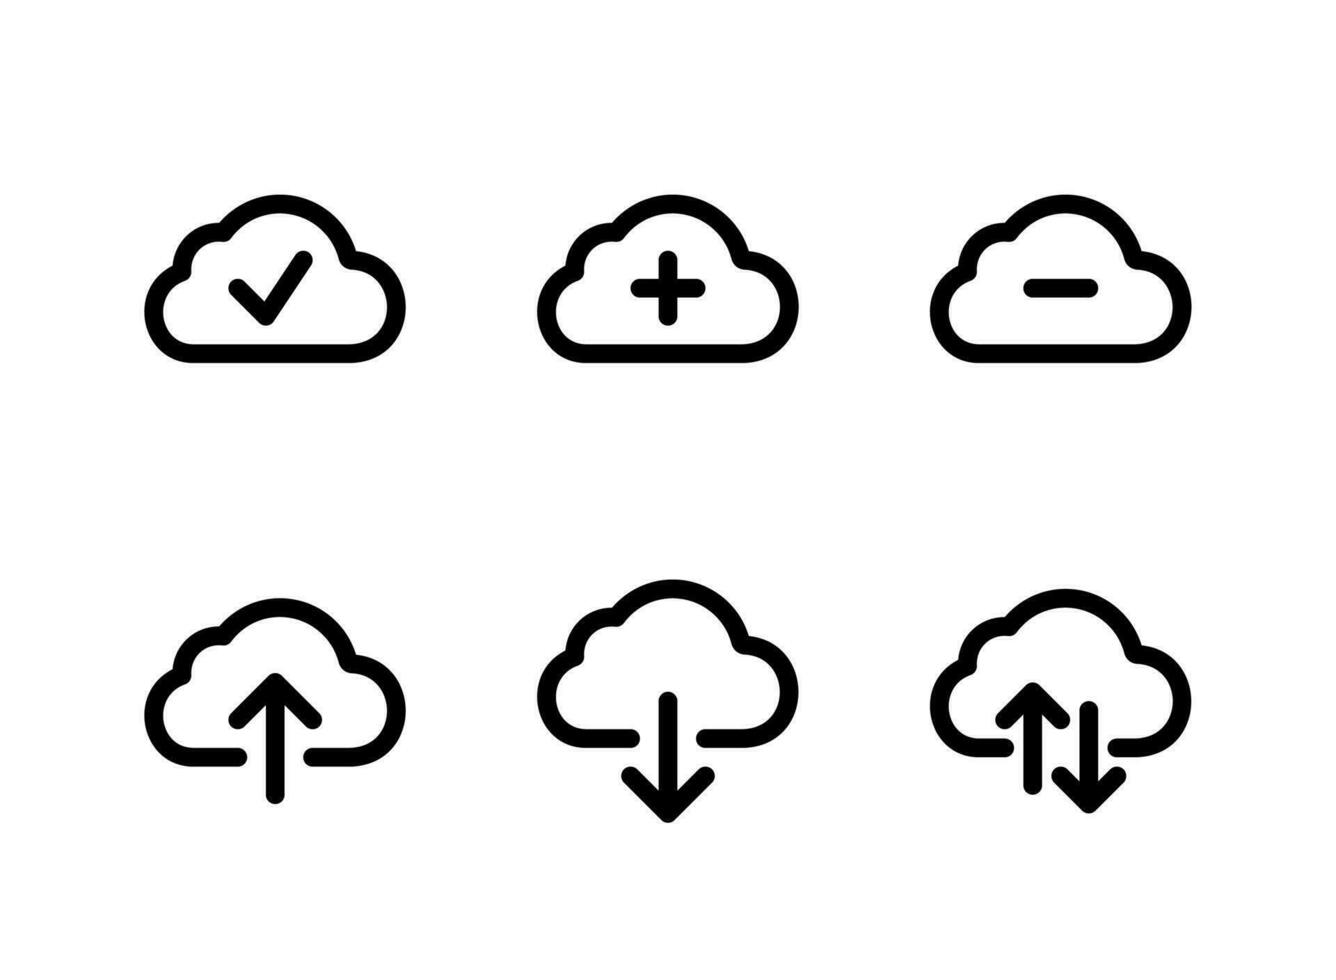 Simple Set of Cloud Computing Related Vector Line Icons. Contains Icons as Check, Add, Remove and more.